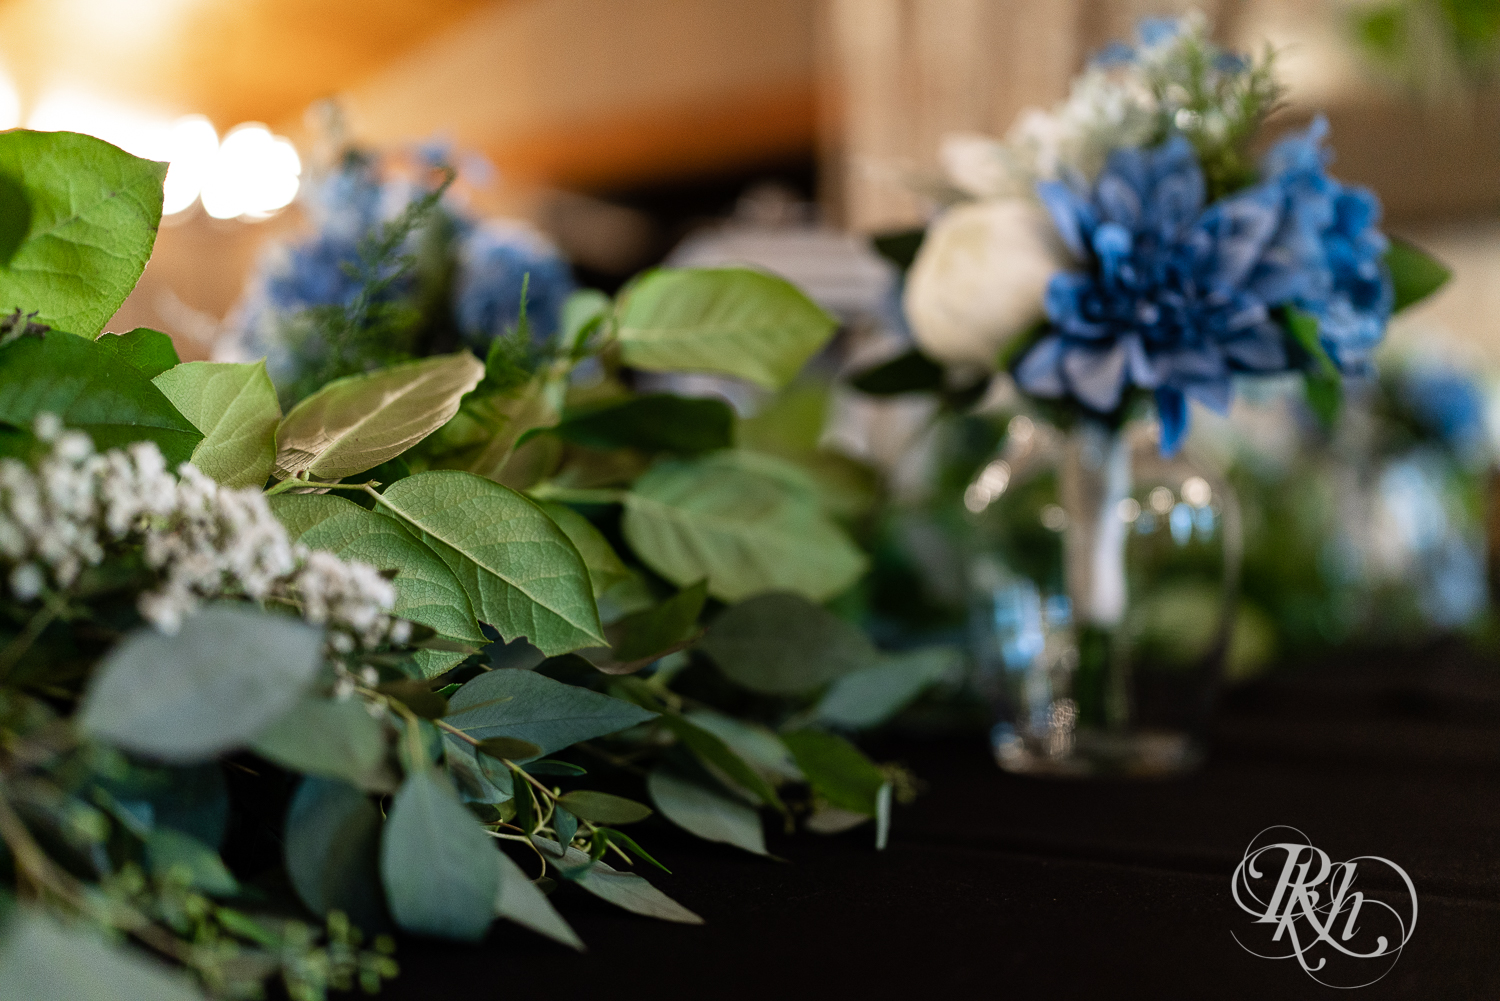 Indoor wedding reception setup at 7 Vines Vineyard in Dellwood, Minnesota with eucalyptus and blue flowers.